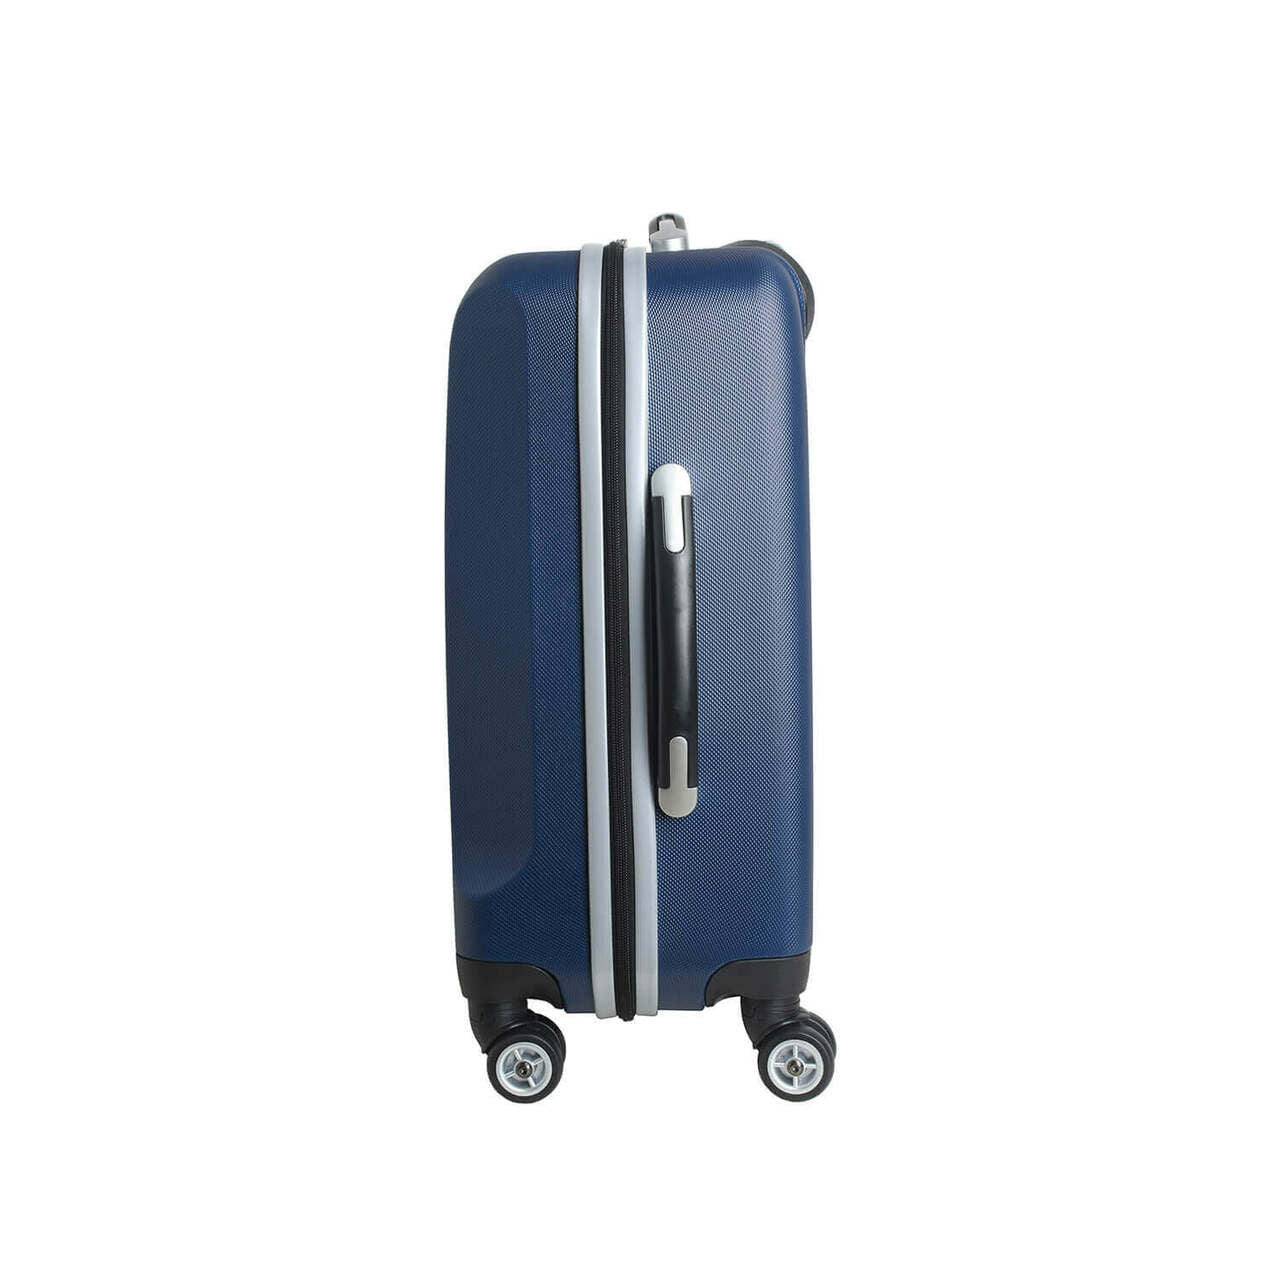 Personalized Initial Name letter "B" 20 inches Carry on Hardcase Spinner Luggage by Mojo in NAVY